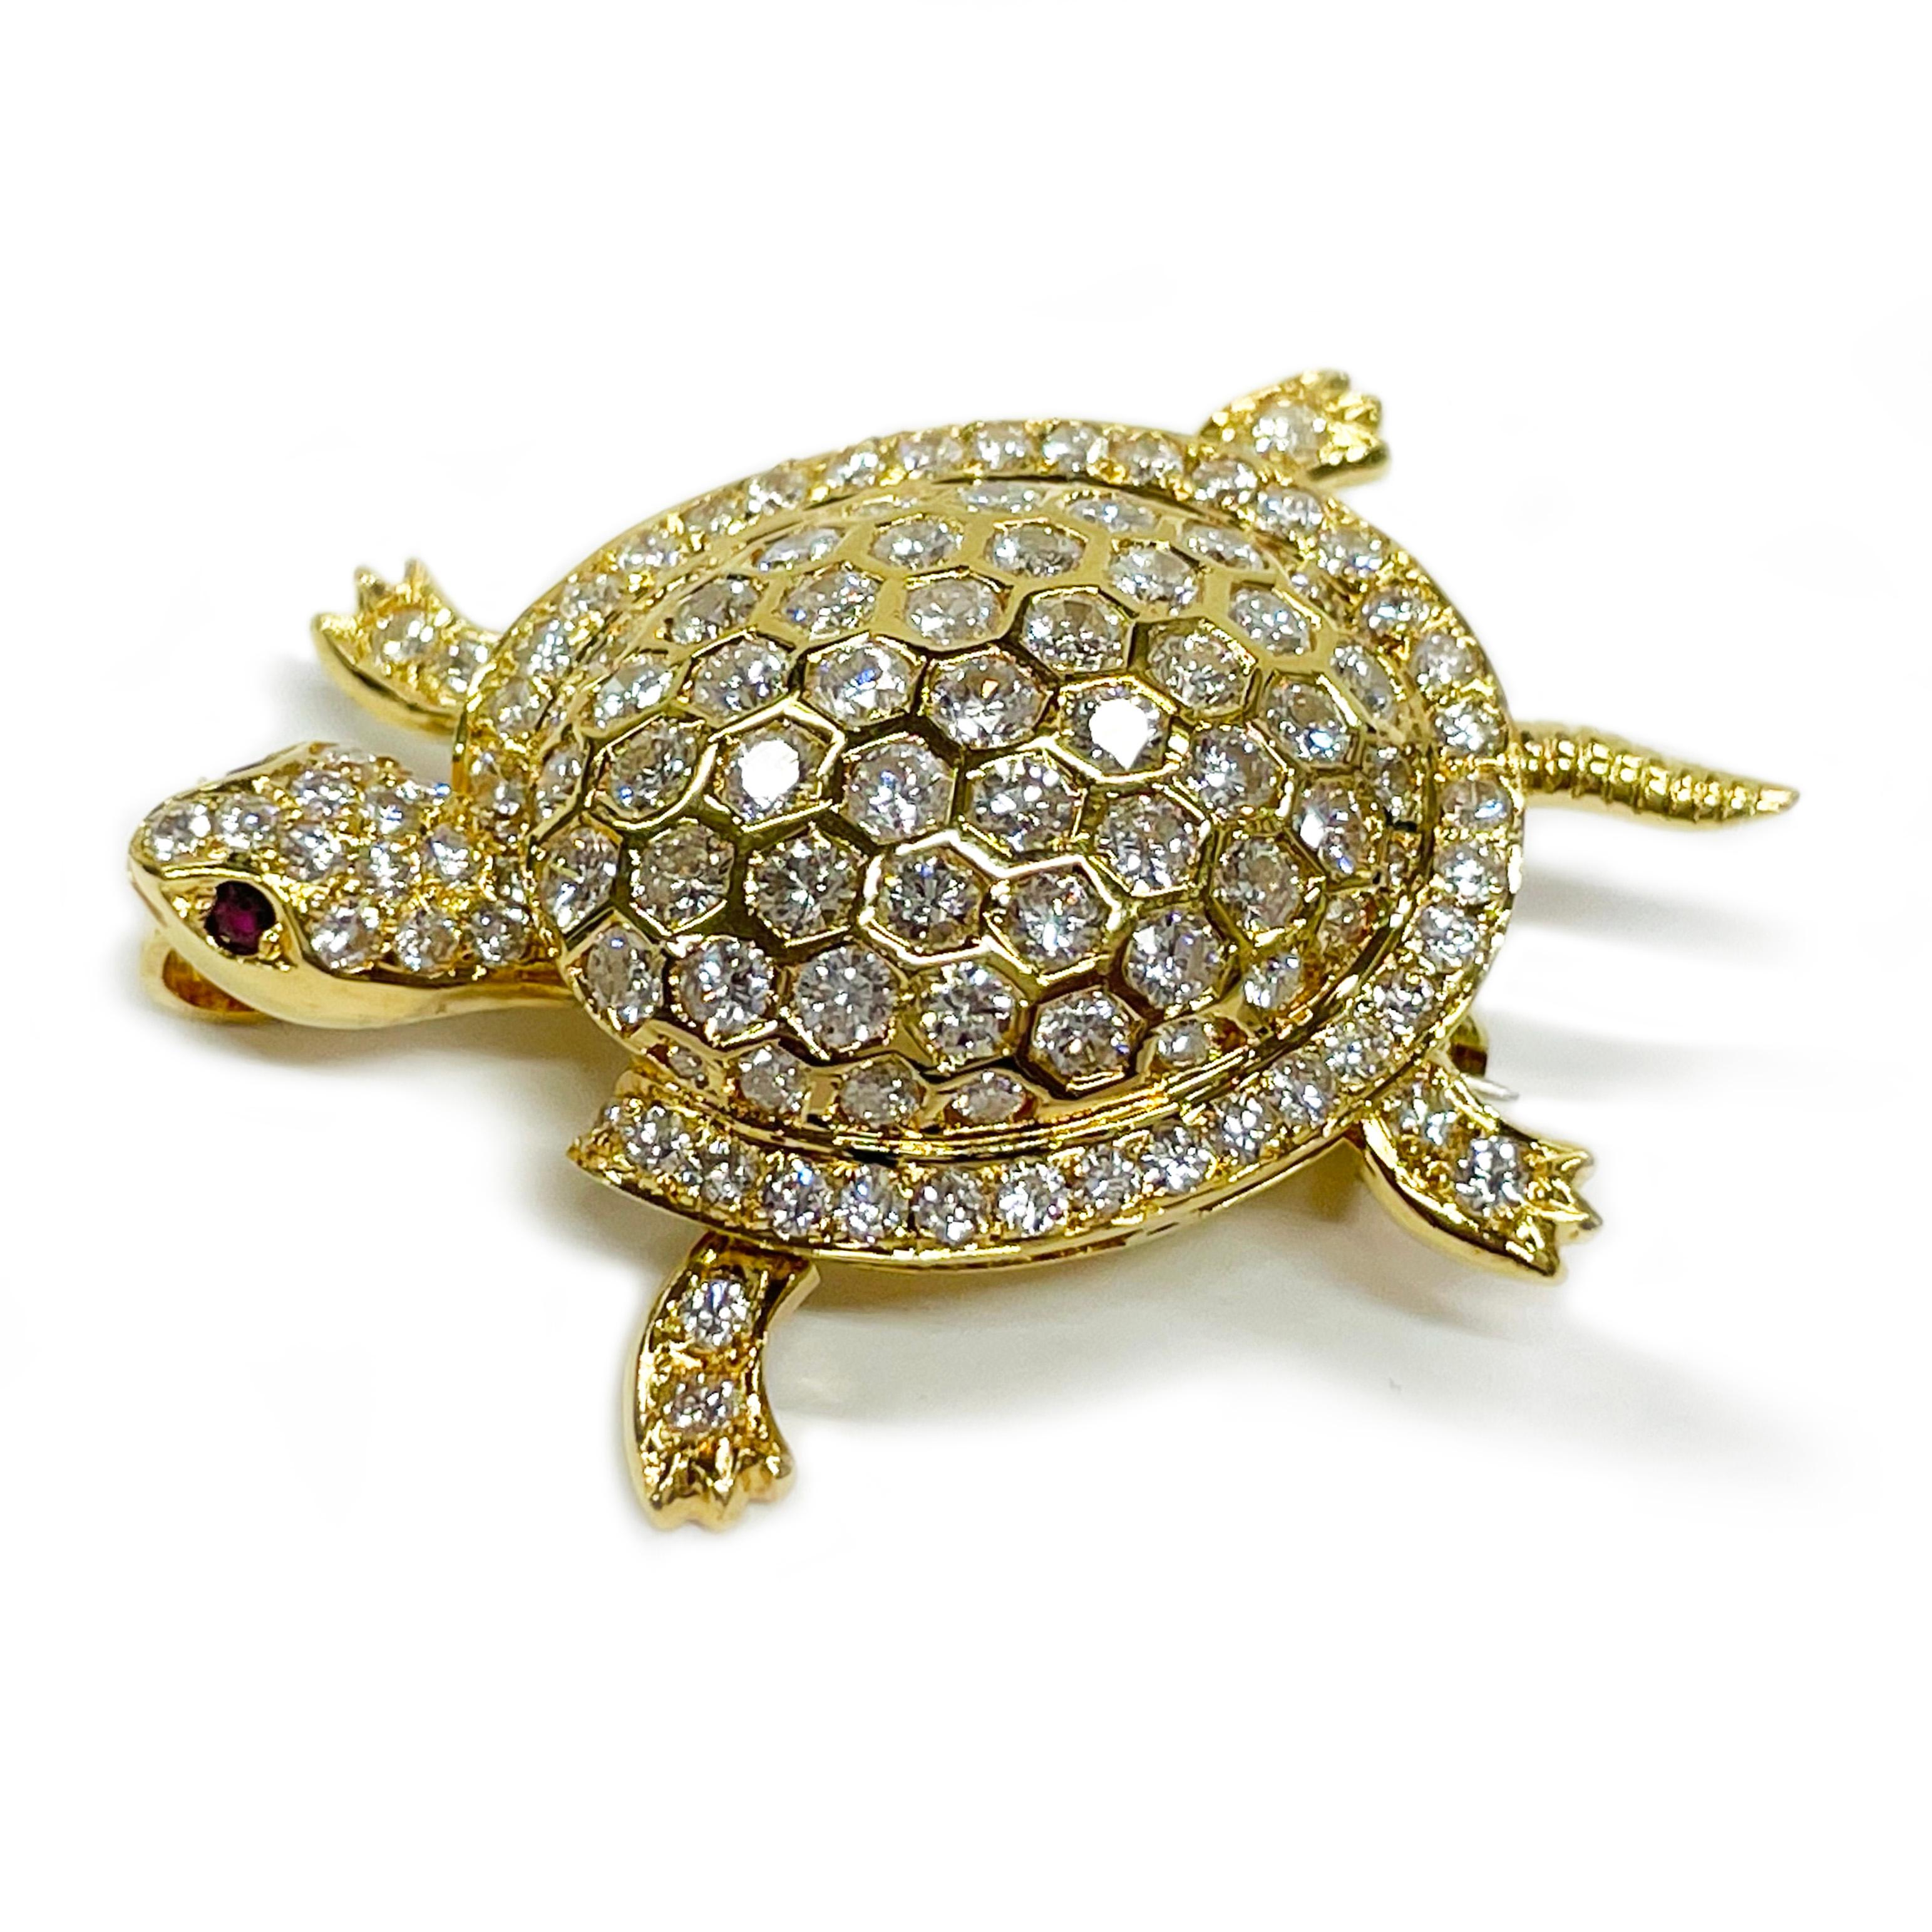 18 Karat Yellow Gold Diamond Turtle Pendant/Brooch. This adorable little fellow has a moveable head, tail, and legs. Brilliant-cut diamonds adorn the shell, legs, and head of the turtle with rubies set in the eyes. There are thirty-four 2.0mm